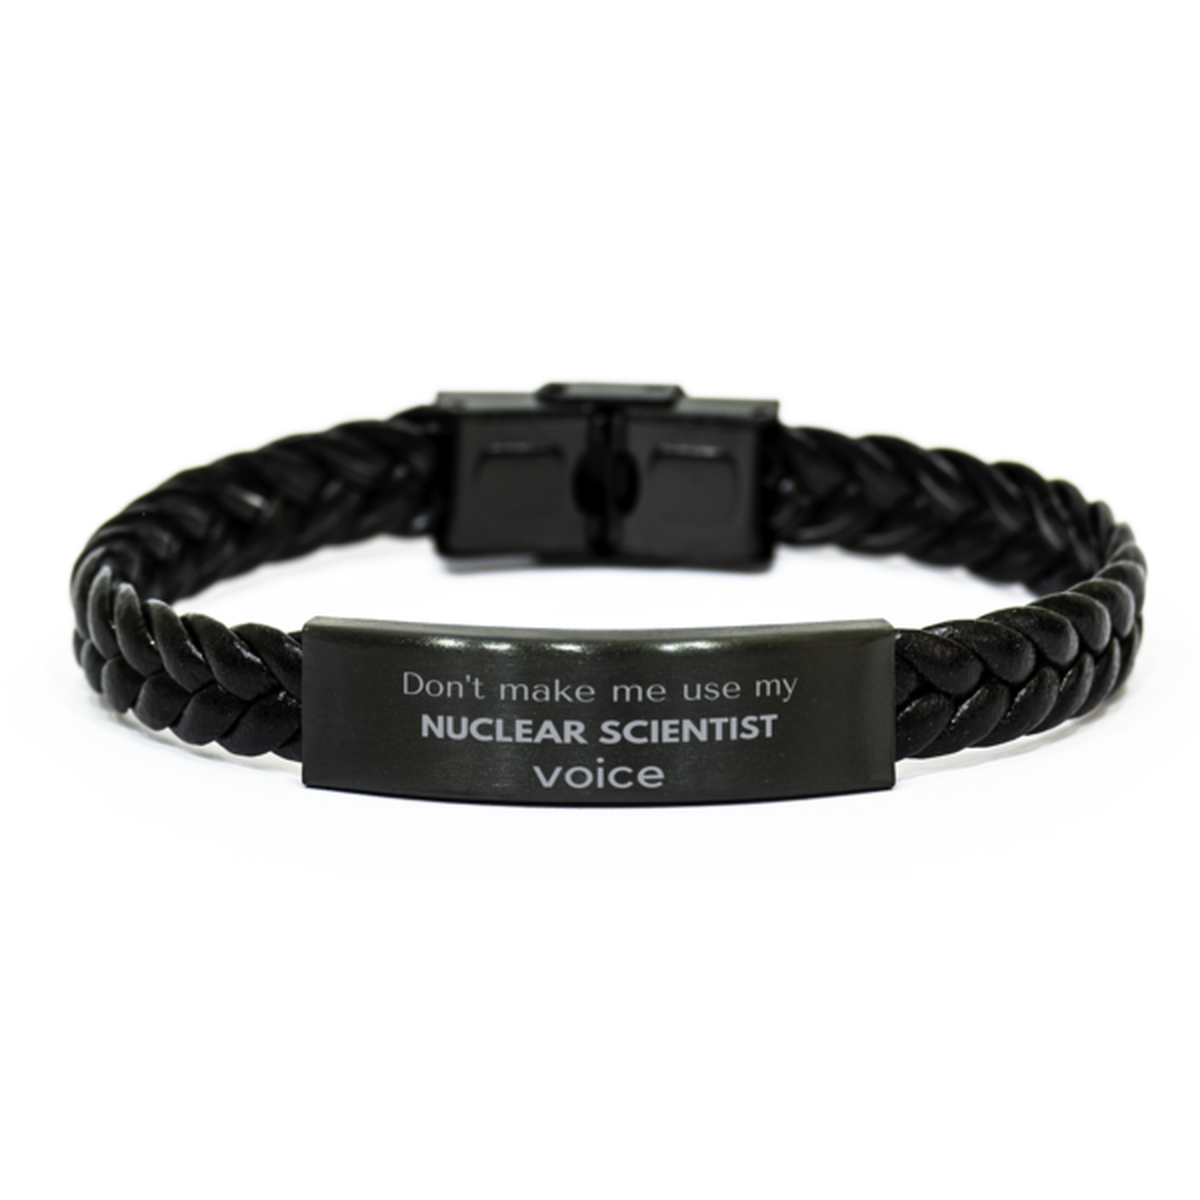 Don't make me use my Nuclear Scientist voice, Sarcasm Nuclear Scientist Gifts, Christmas Nuclear Scientist Braided Leather Bracelet Birthday Unique Gifts For Nuclear Scientist Coworkers, Men, Women, Colleague, Friends